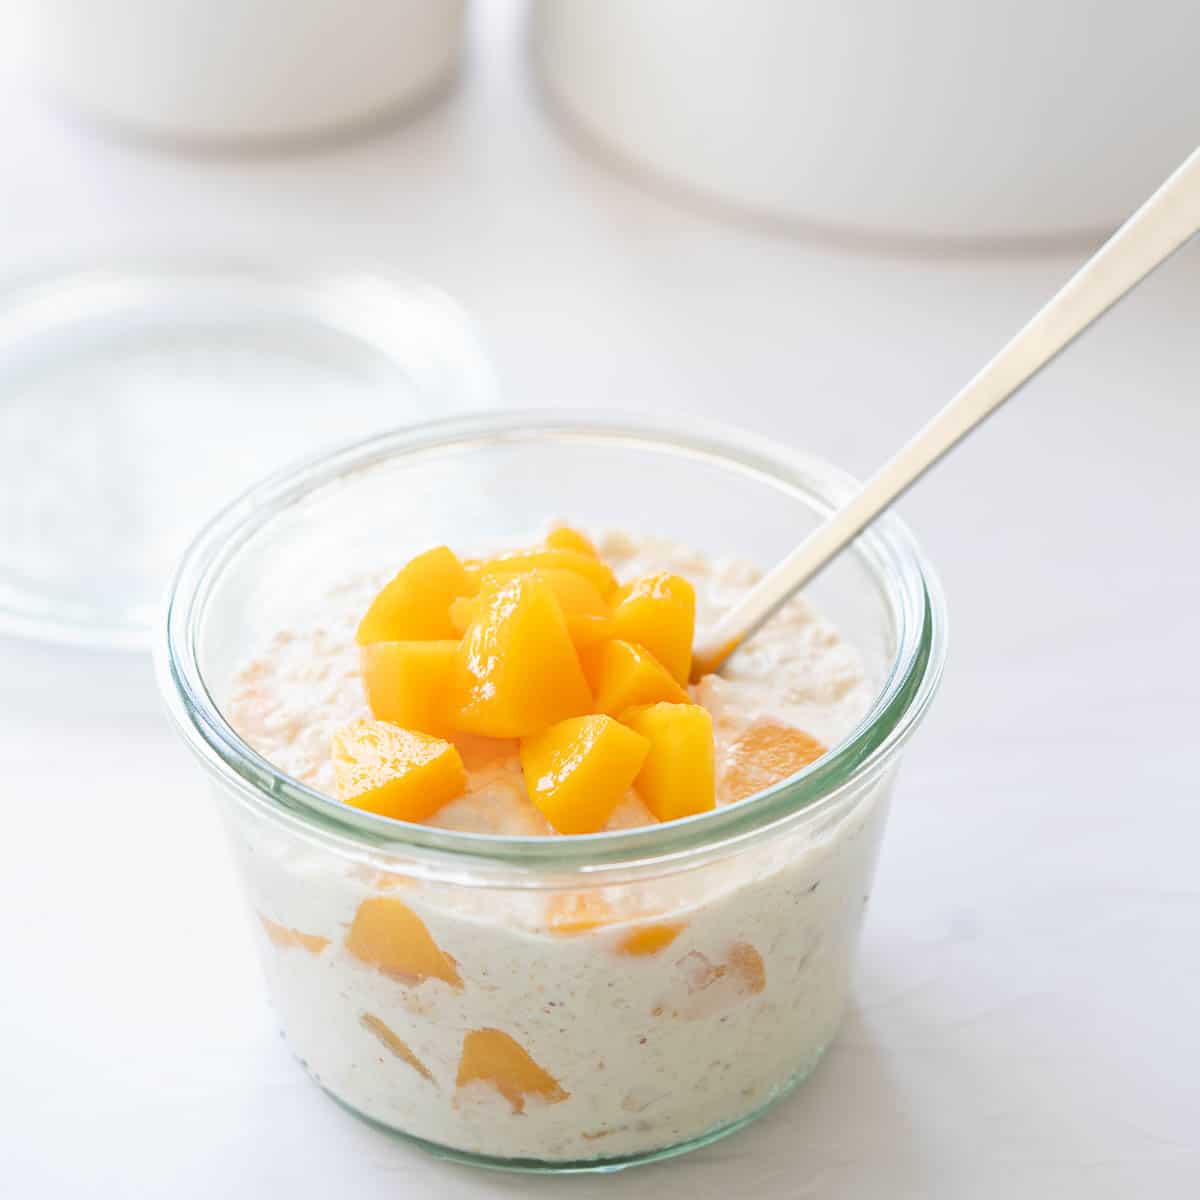 A glass jar of creamy white oats topped with diced peaches, with a long parfait spoon.